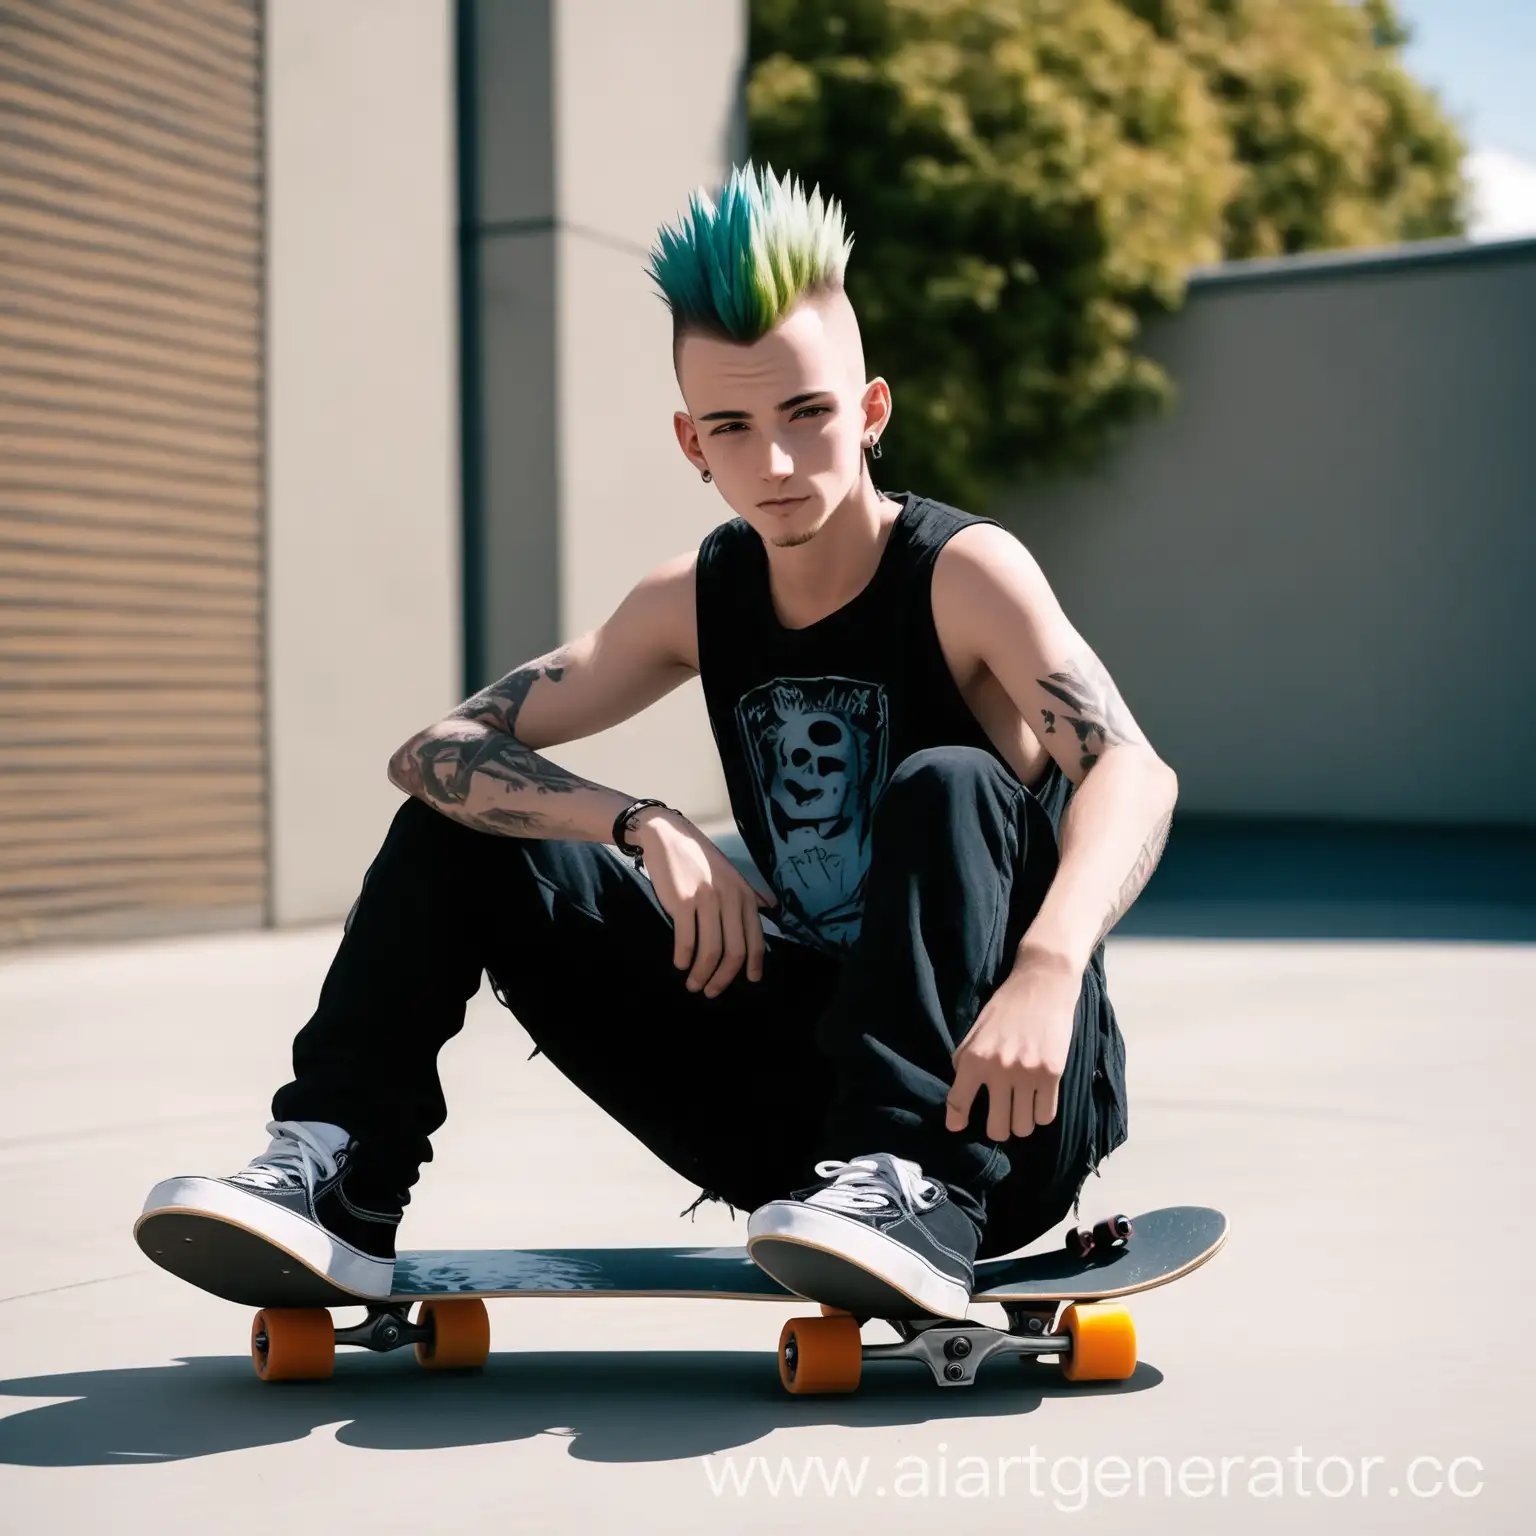 Young-Man-with-Mohawk-Sitting-on-Skateboard